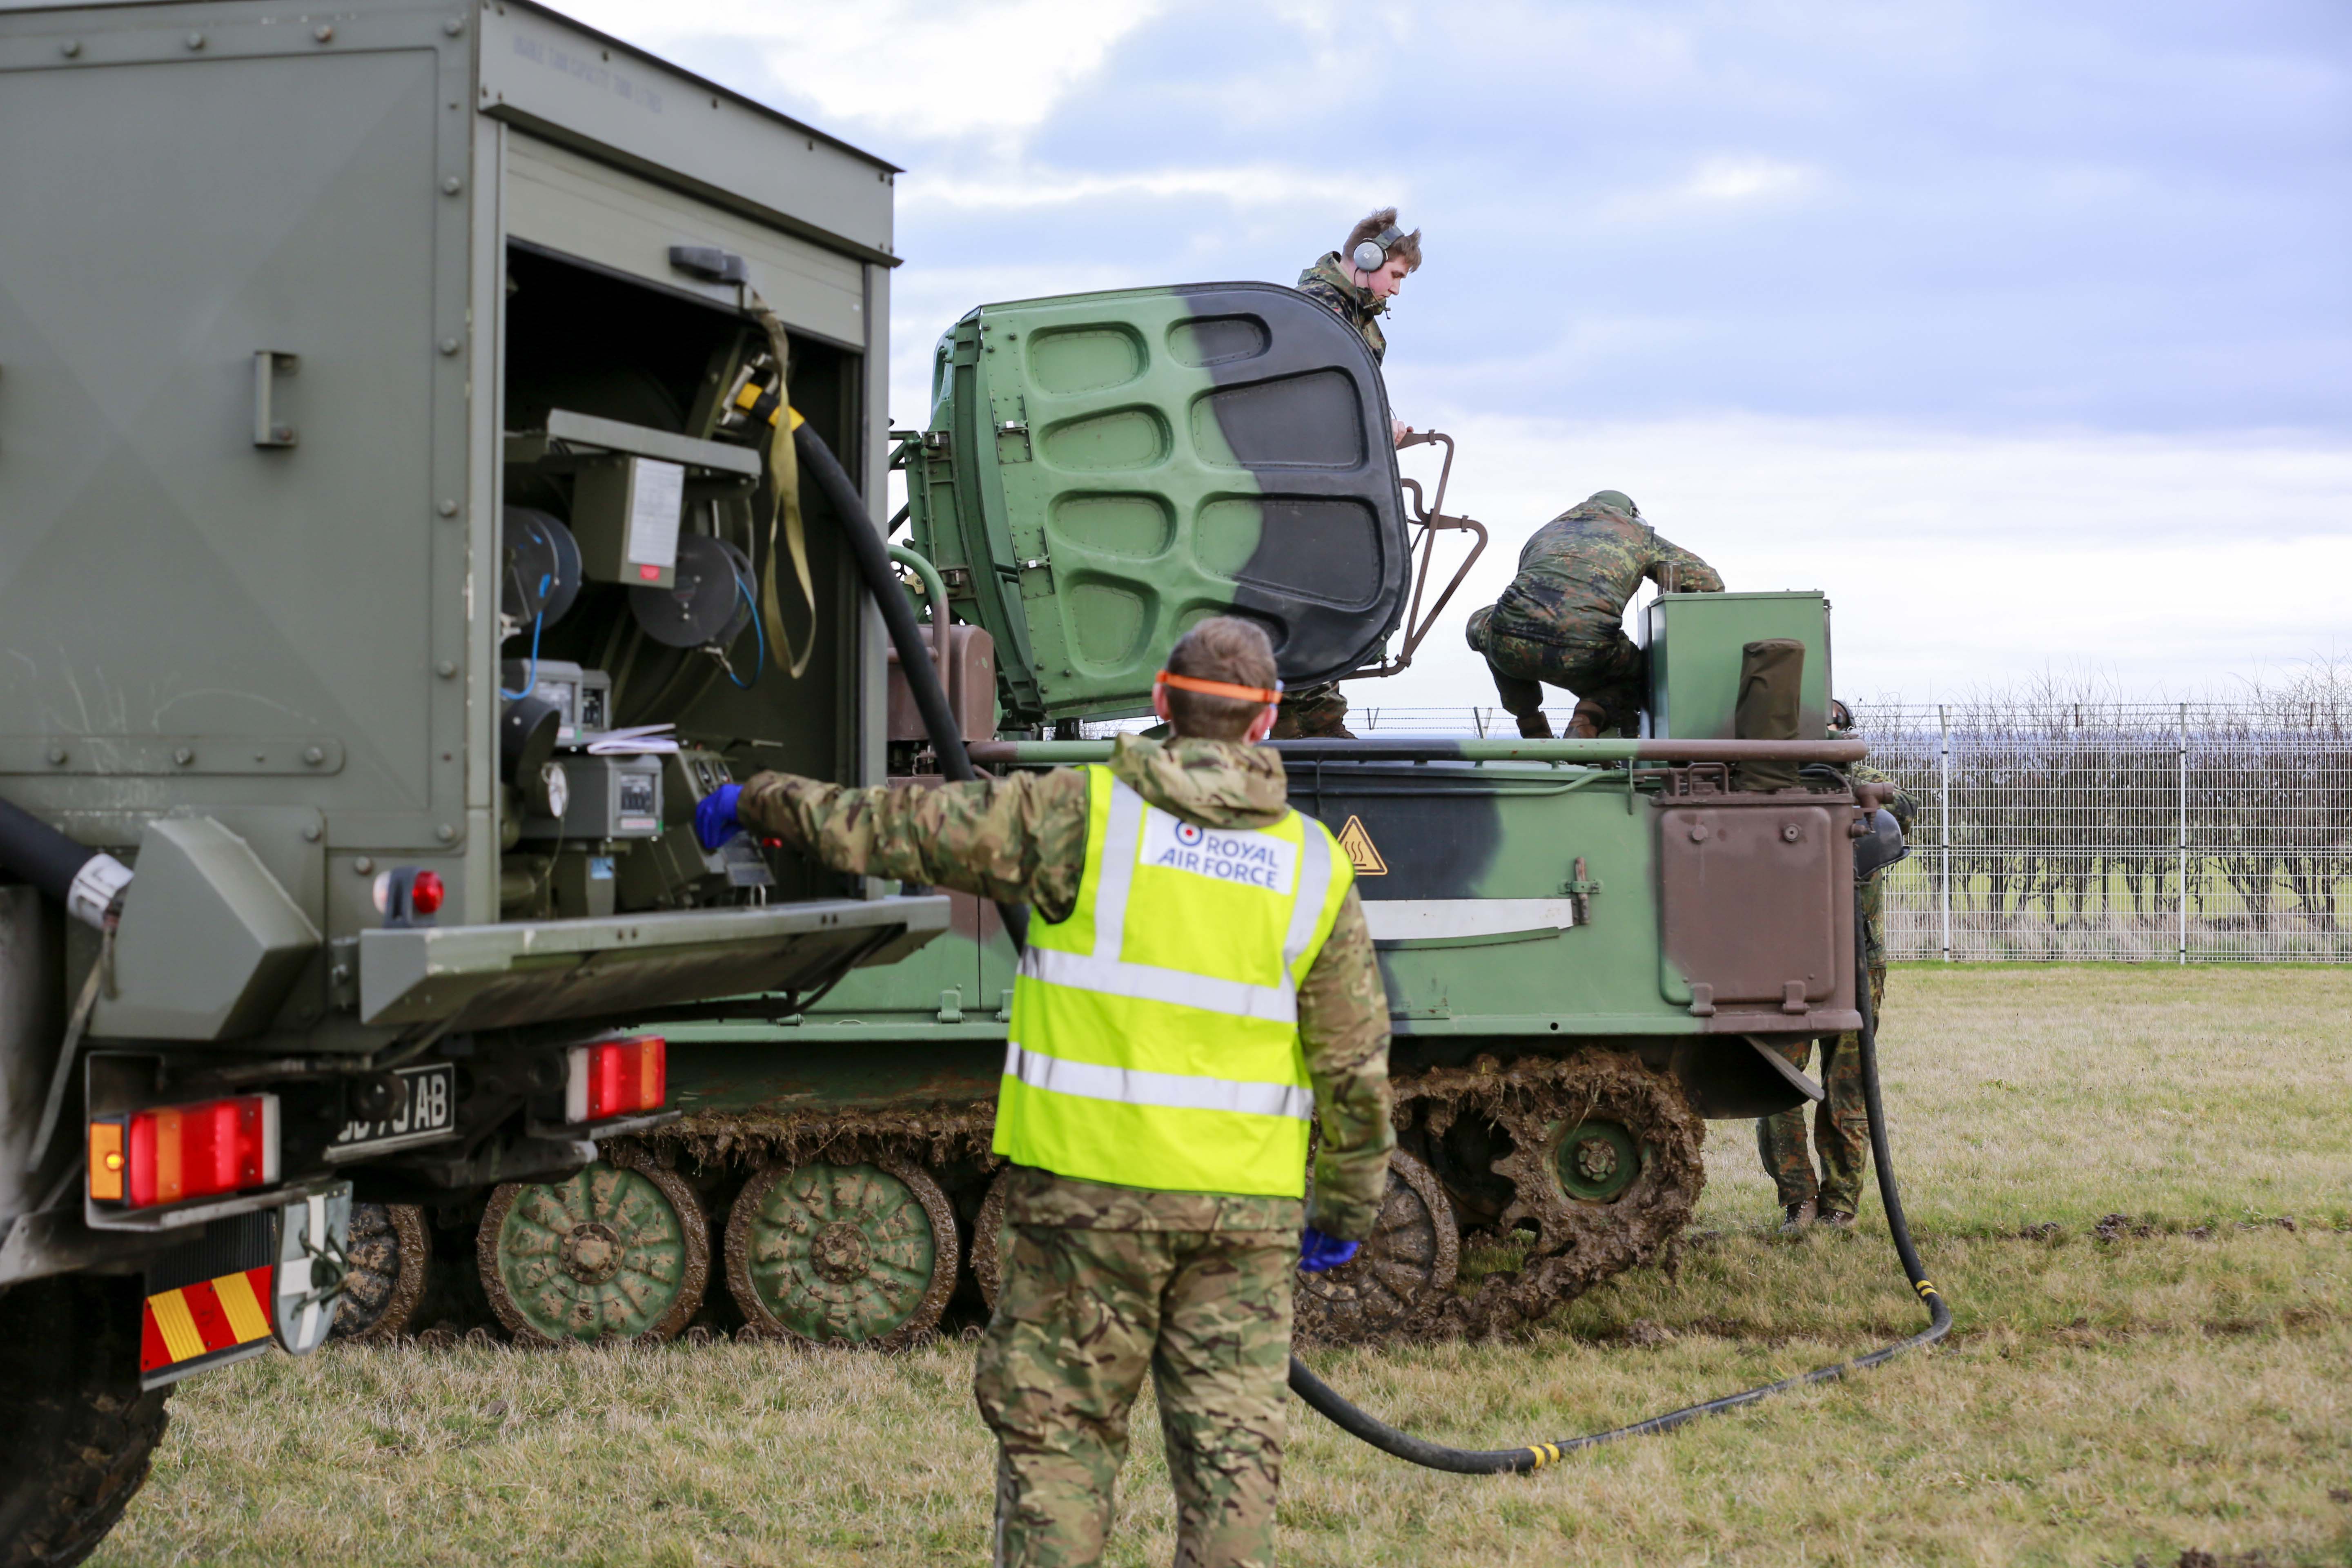 Image shows personnel refuelling heavy vehicles.